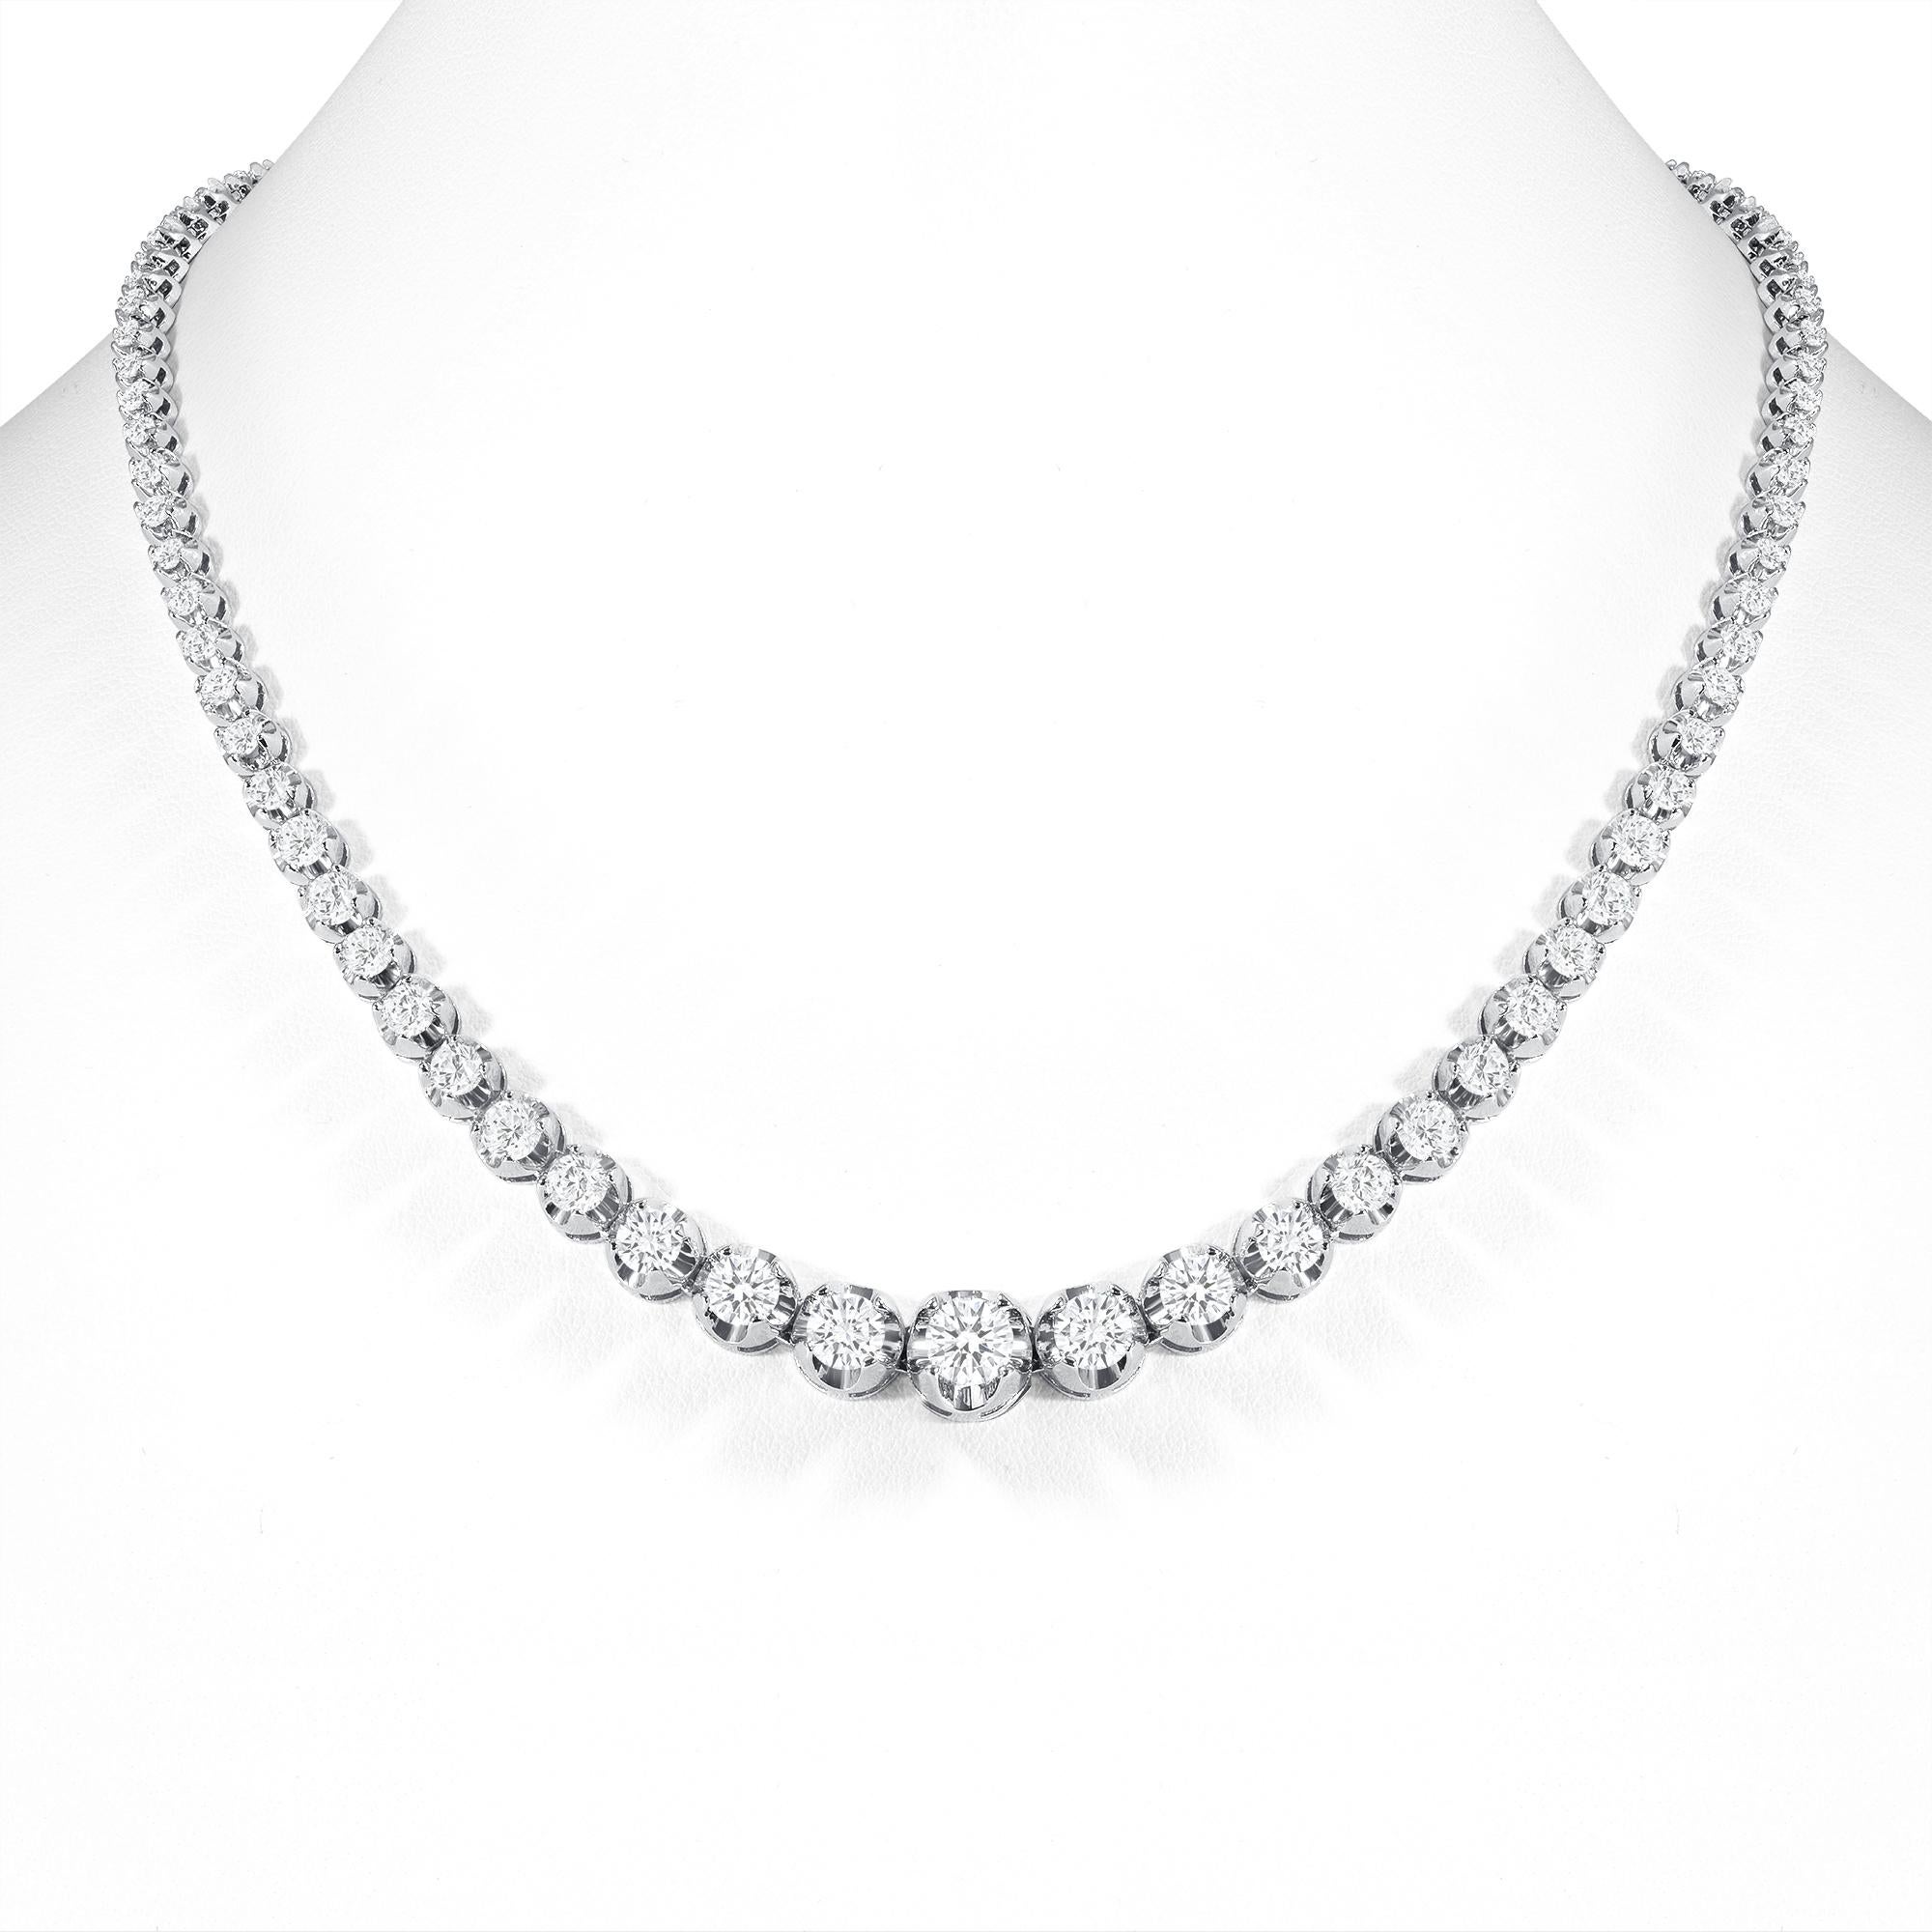 This finely made graduated necklace with beautiful round diamonds sits elegantly on any neck. 

Metal: 14k Gold
Diamond Cut: Round
Total Diamond Approx. Carats:  10ct
Diamond Clarity: VS
Diamond Color: F-G
Size: 18 inches
Color: White Gold
Included